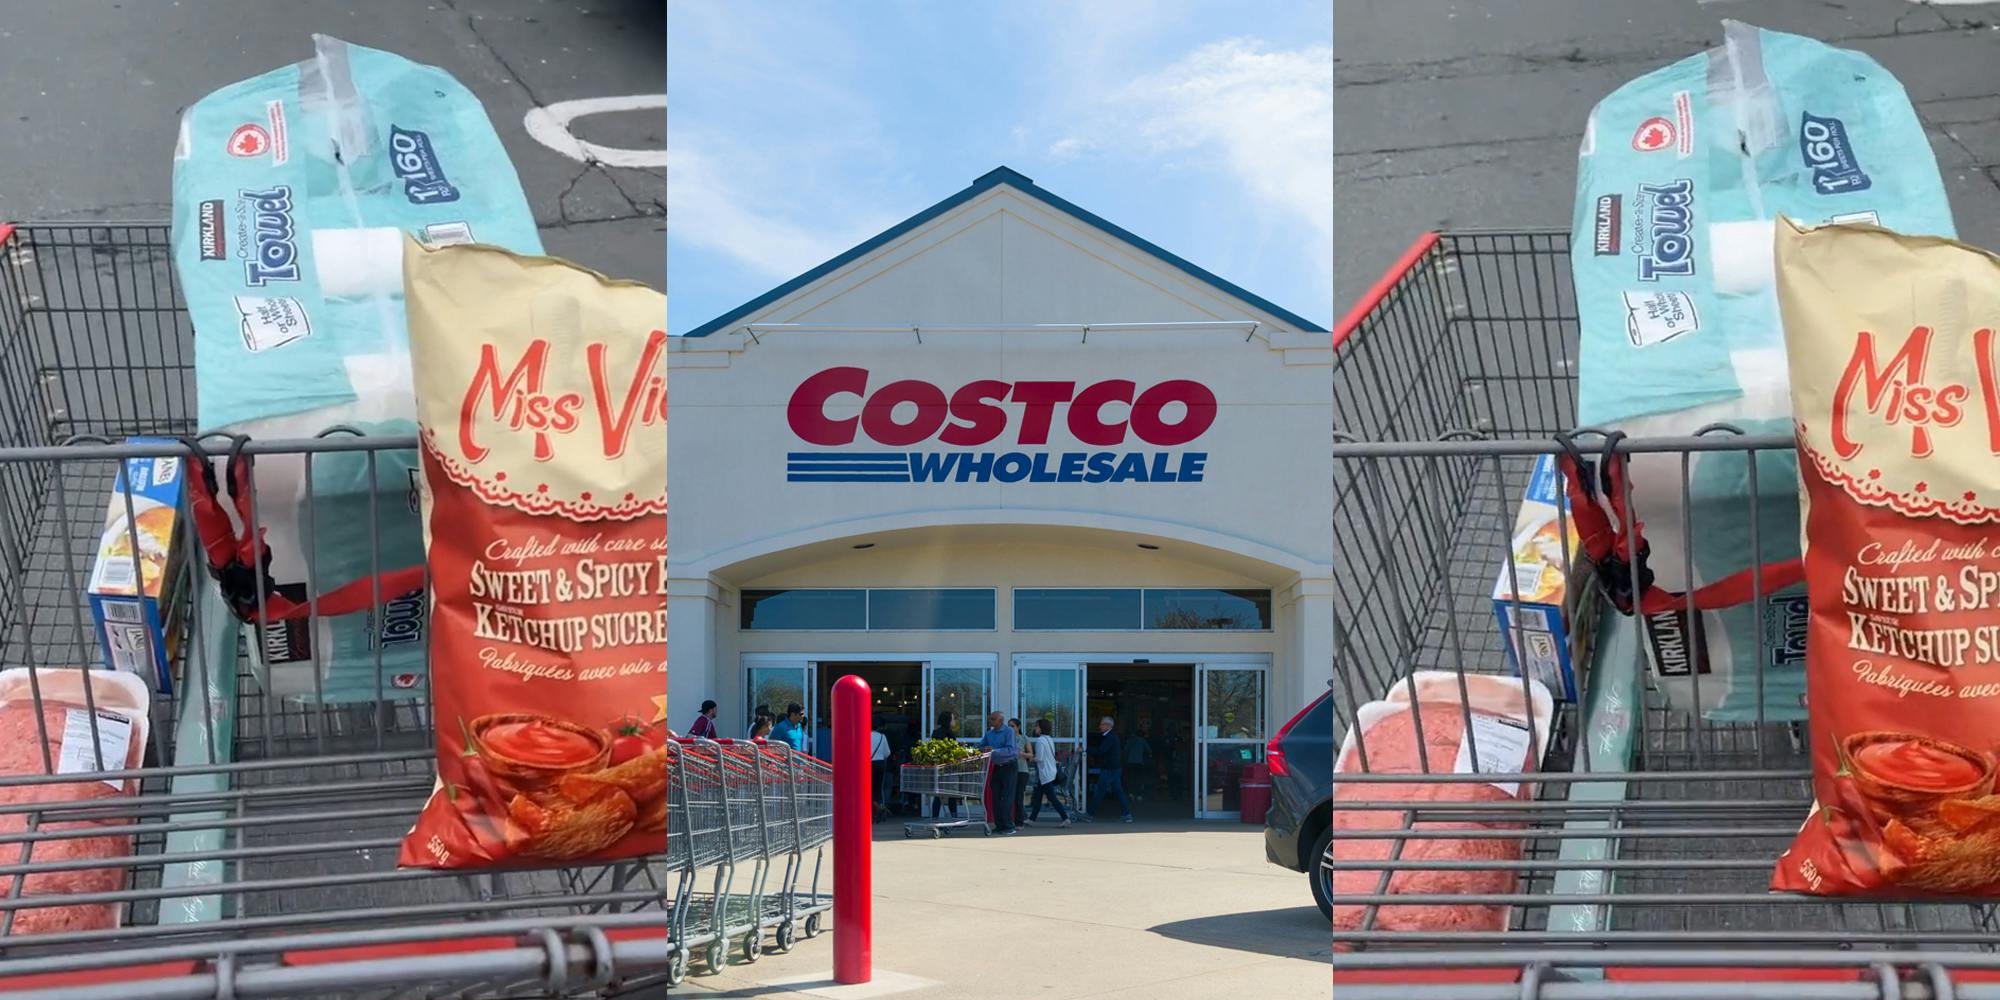 food in grocery cart being pushed at Costco parking lot (l) Costco building with sign (c) food in grocery cart being pushed at Costco parking lot (r)